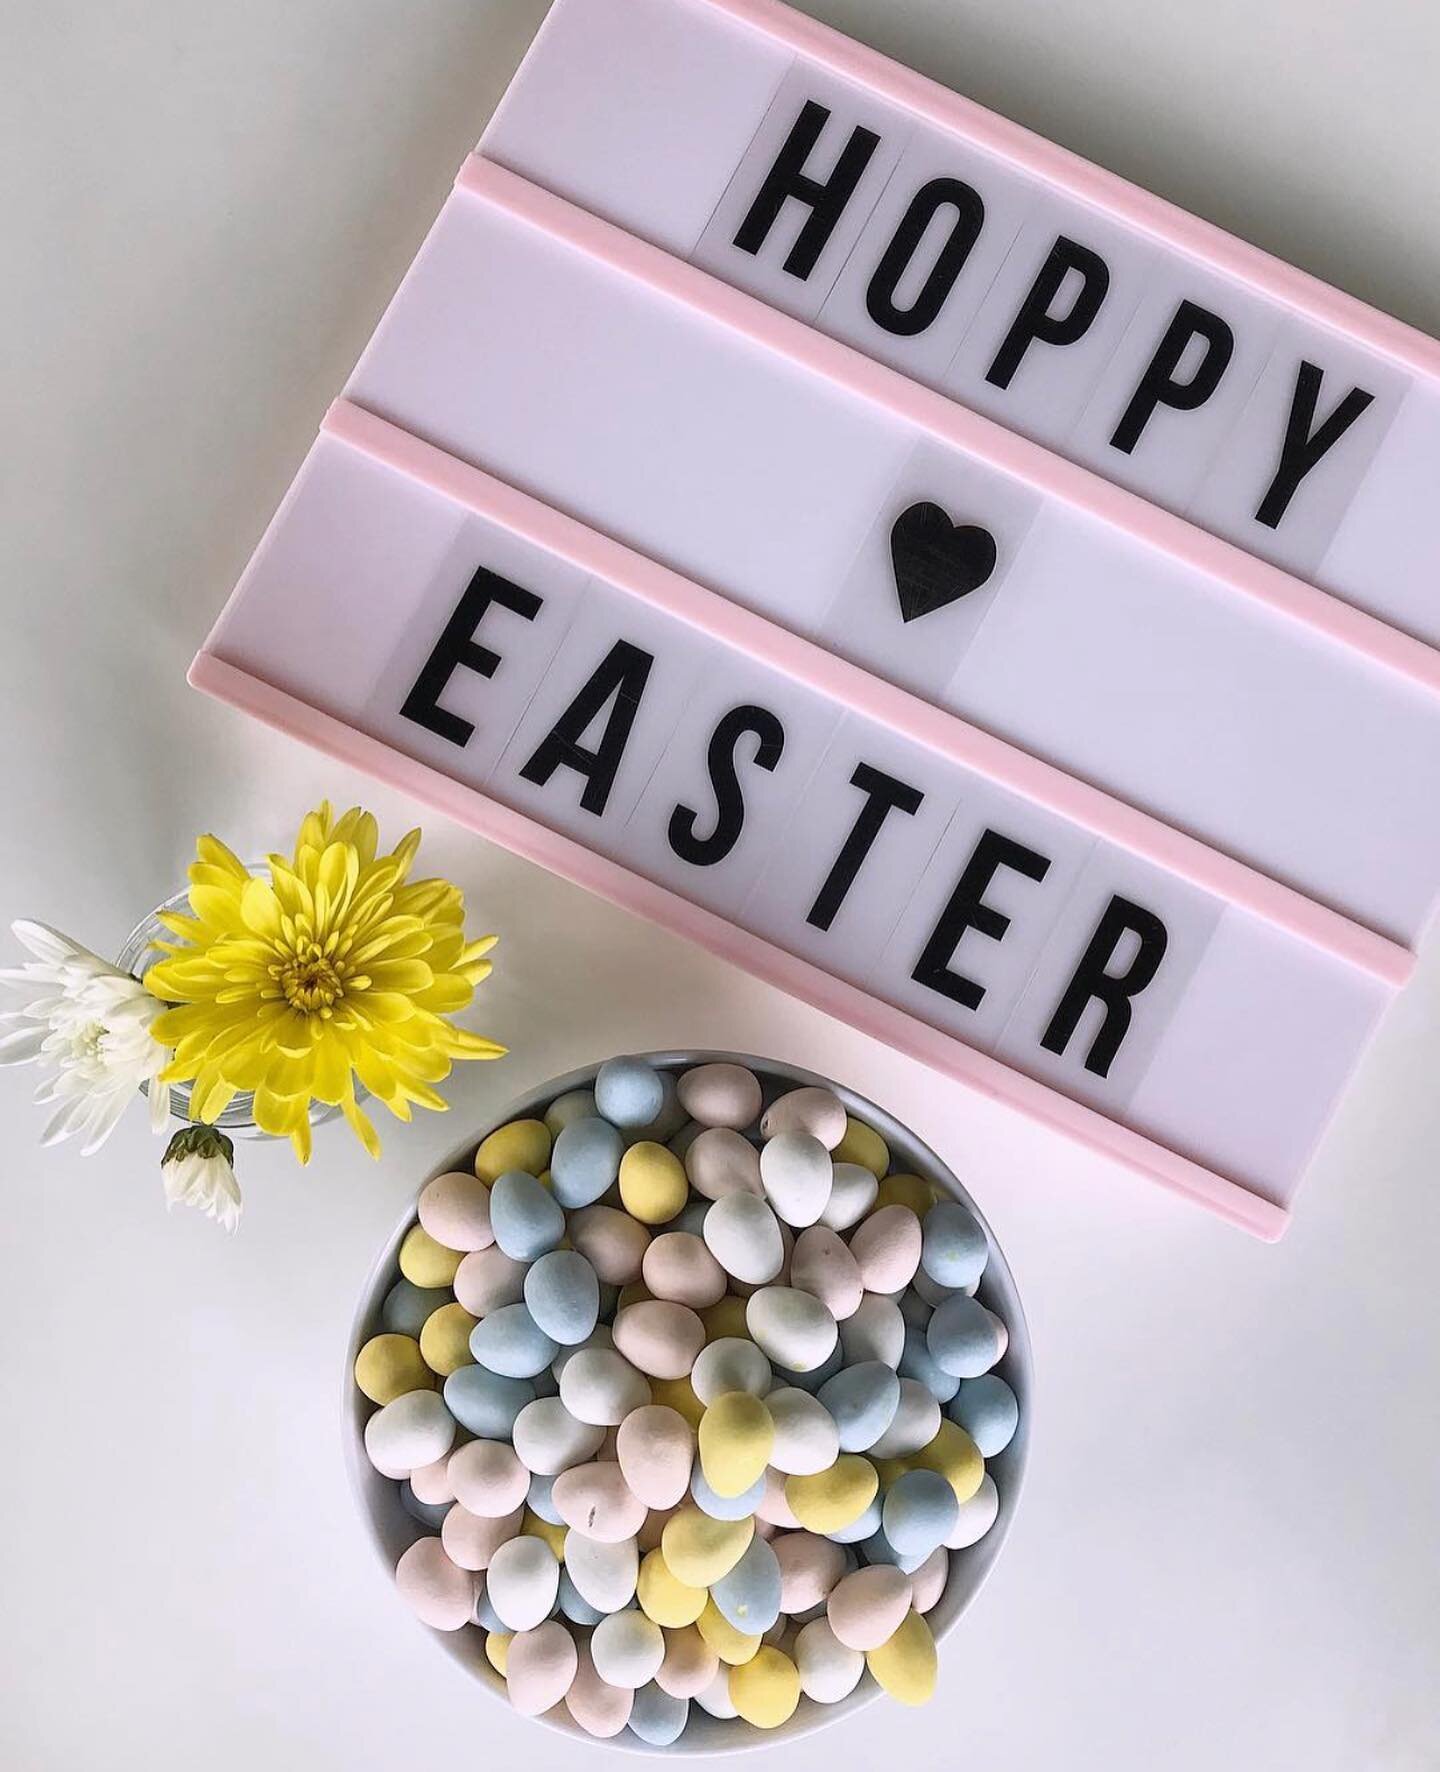 Our family here at Cr&ecirc;pe Escape would like to wish all of our amazing customers a very Happy Easter - we hope the bunny was good to you 🐰🐣💐

We are open today at the shop from 9 AM until 3 PM and closed as per usual tomorrow (Monday) and Tue